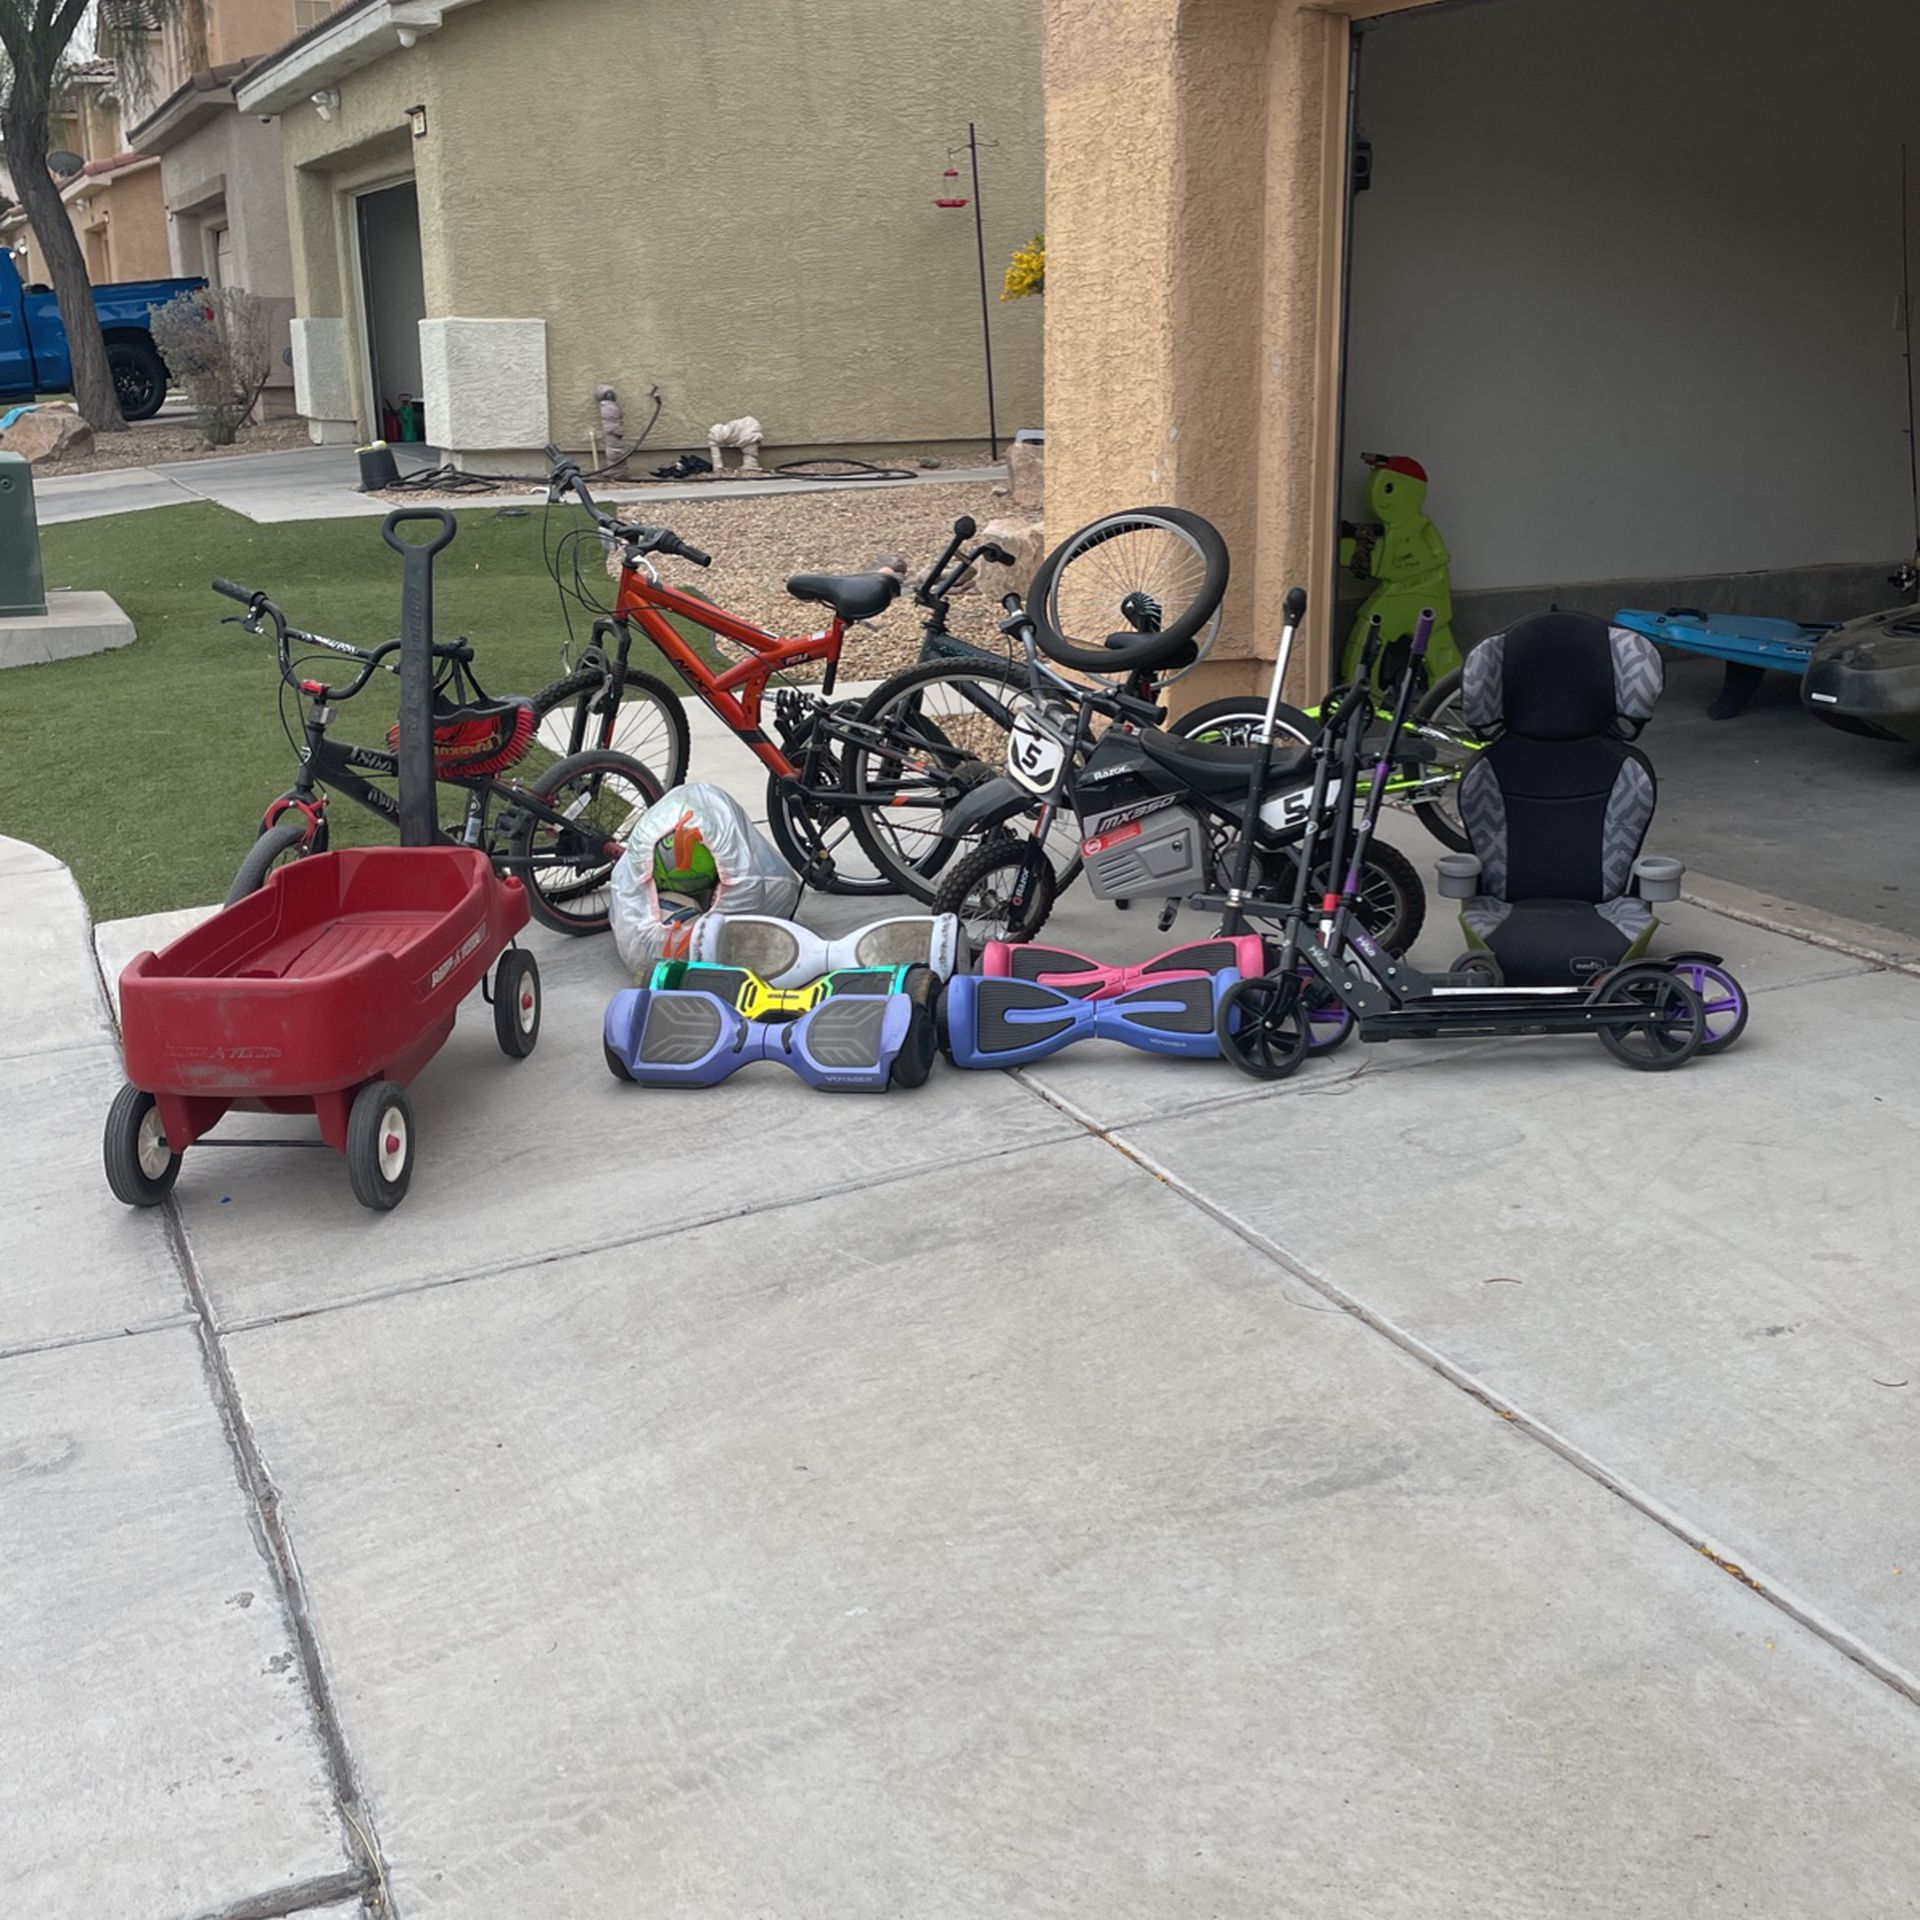 Lot Of Bicycles, Scooters, Hover Boards, Wagon, Bag Of Balls And Car Seat